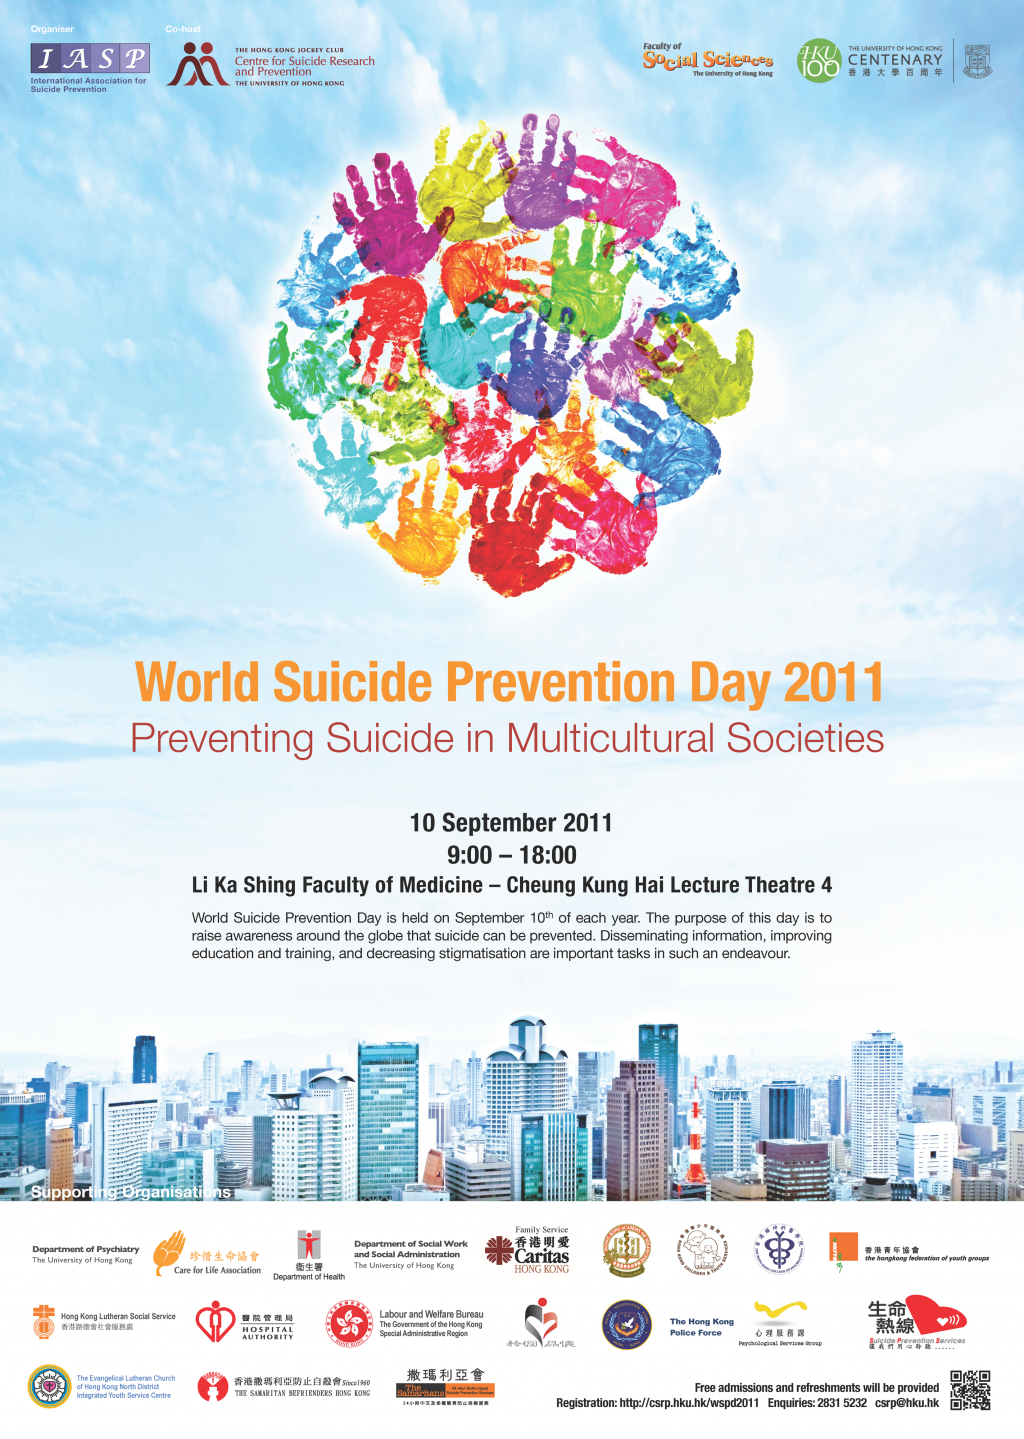 World Suicide Prevention Day 2011 